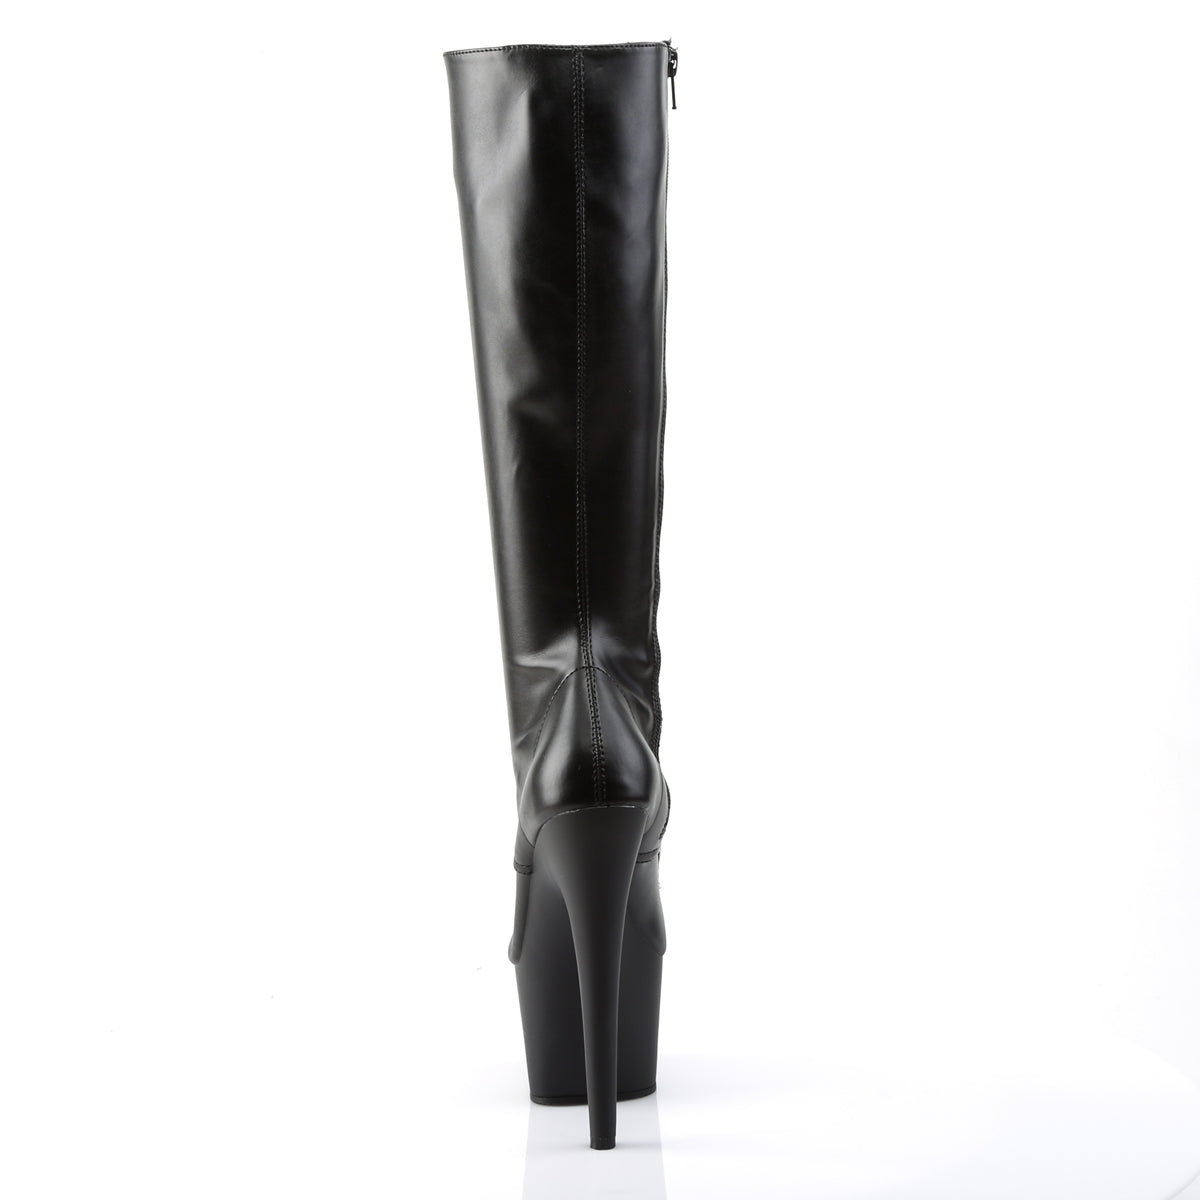 ADORE-2023 Black Knee High Boots